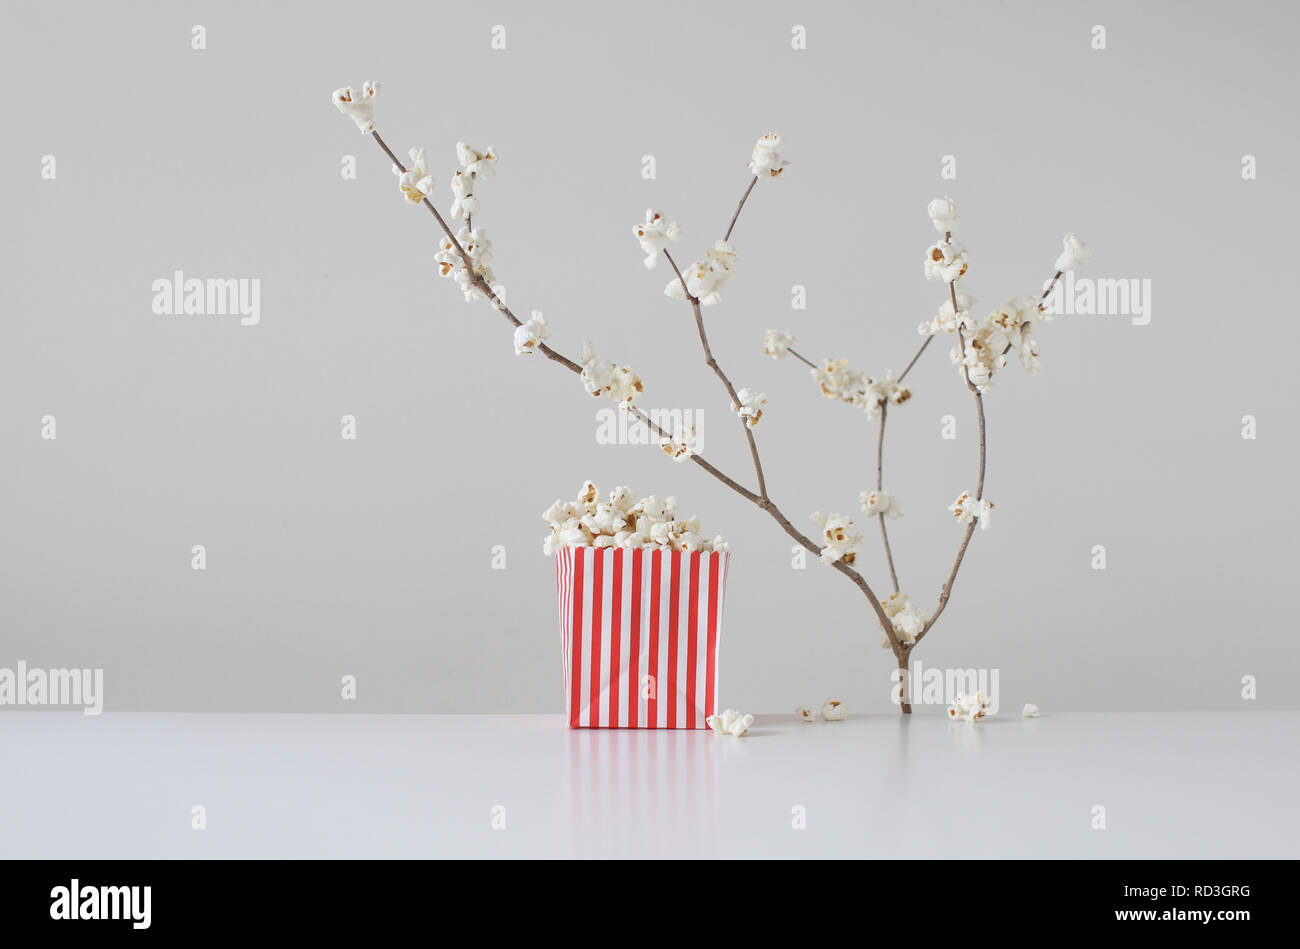 Conceptual cherry blossom flowers growing on a tree next to a bag of popcorn Stock Photo